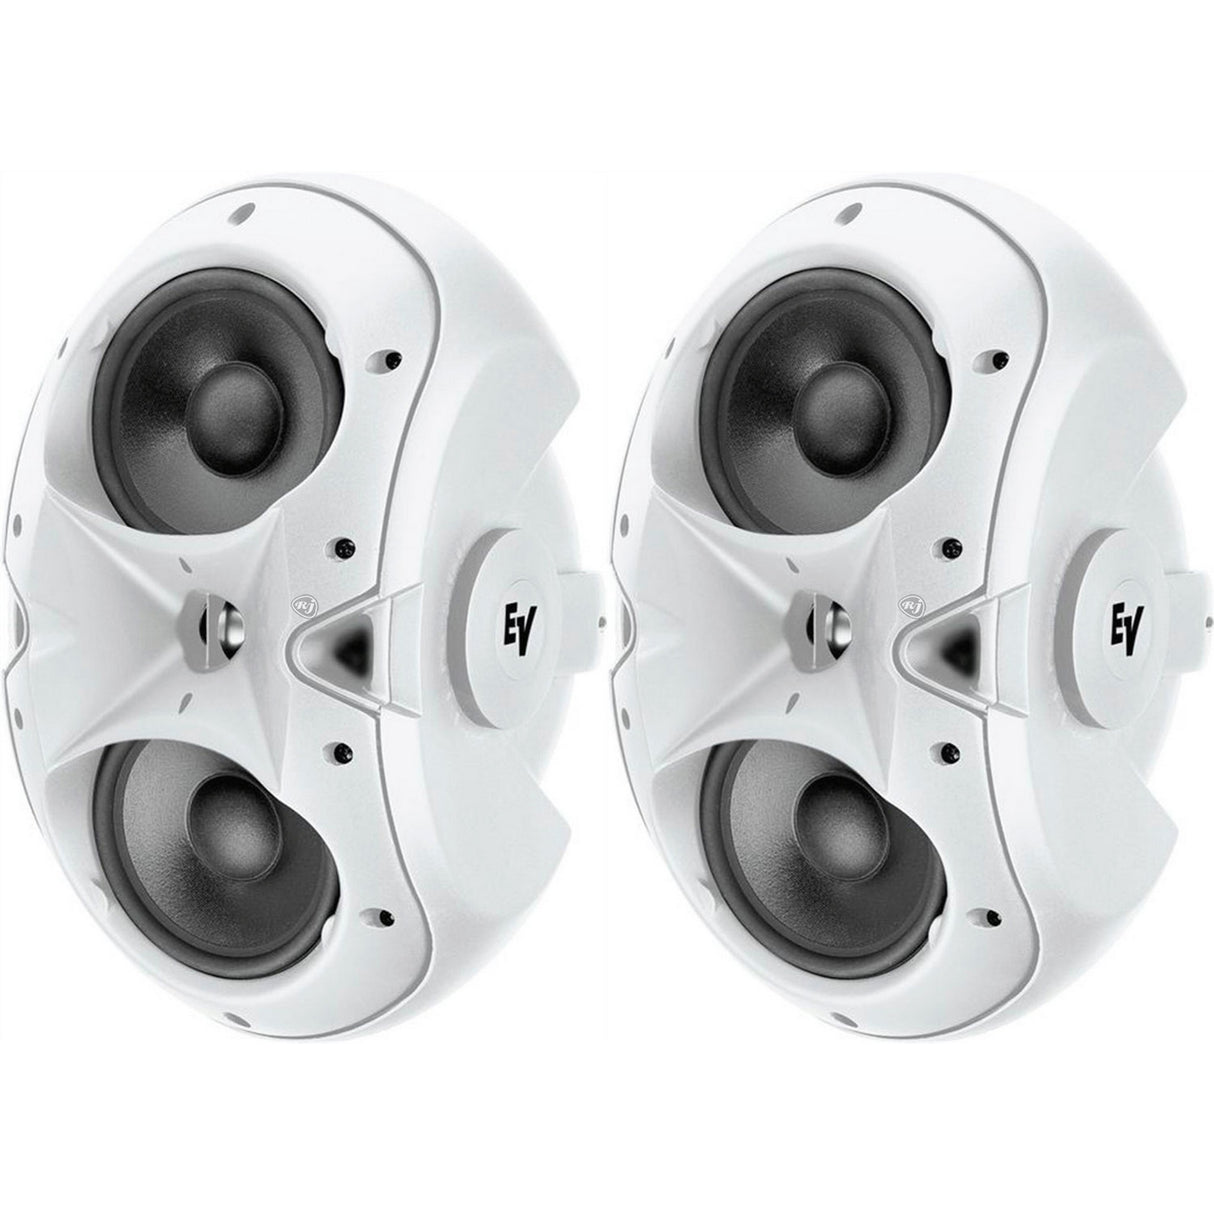 Electro Voice EVID 4.2W 4-Inch Two Way Surface Mount Speakers, White, Pair (Used)